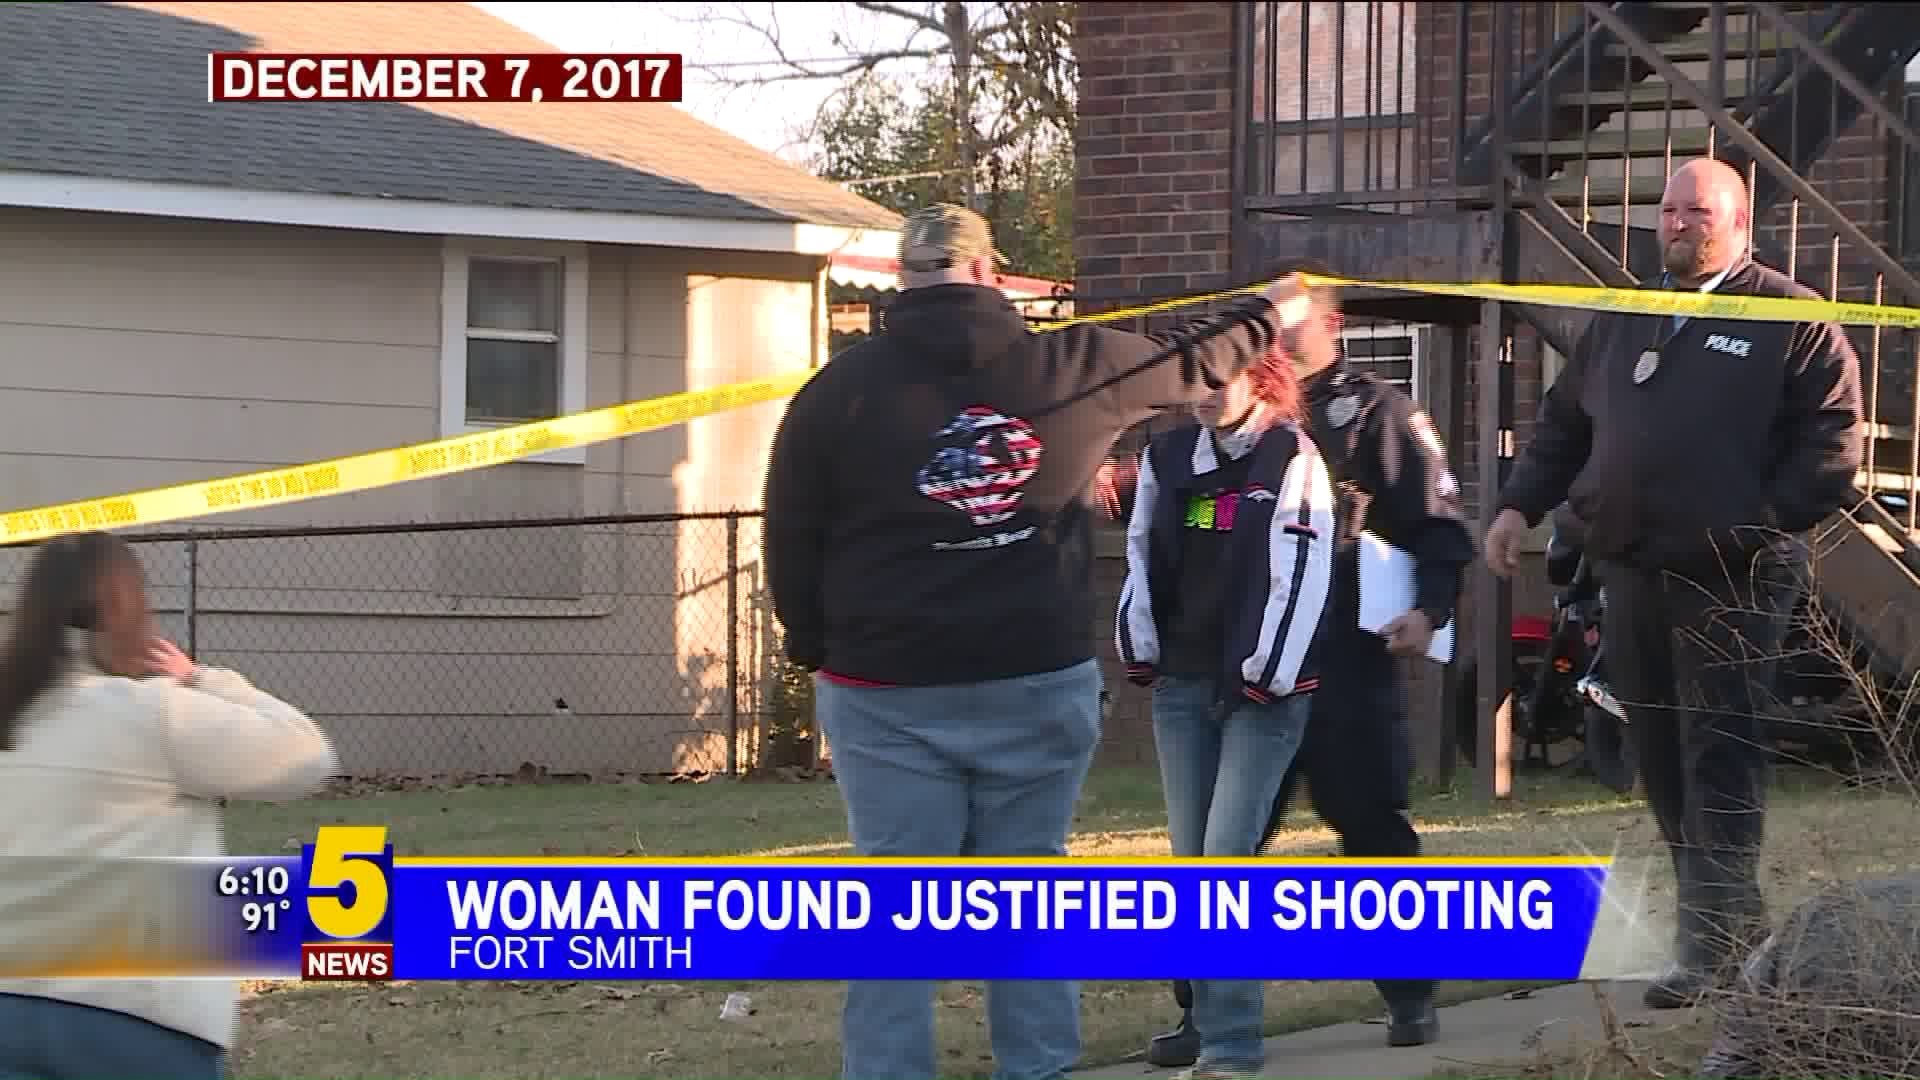 Woman Found Justified In Shooting, Arrested For Being Criminal With A Firearm